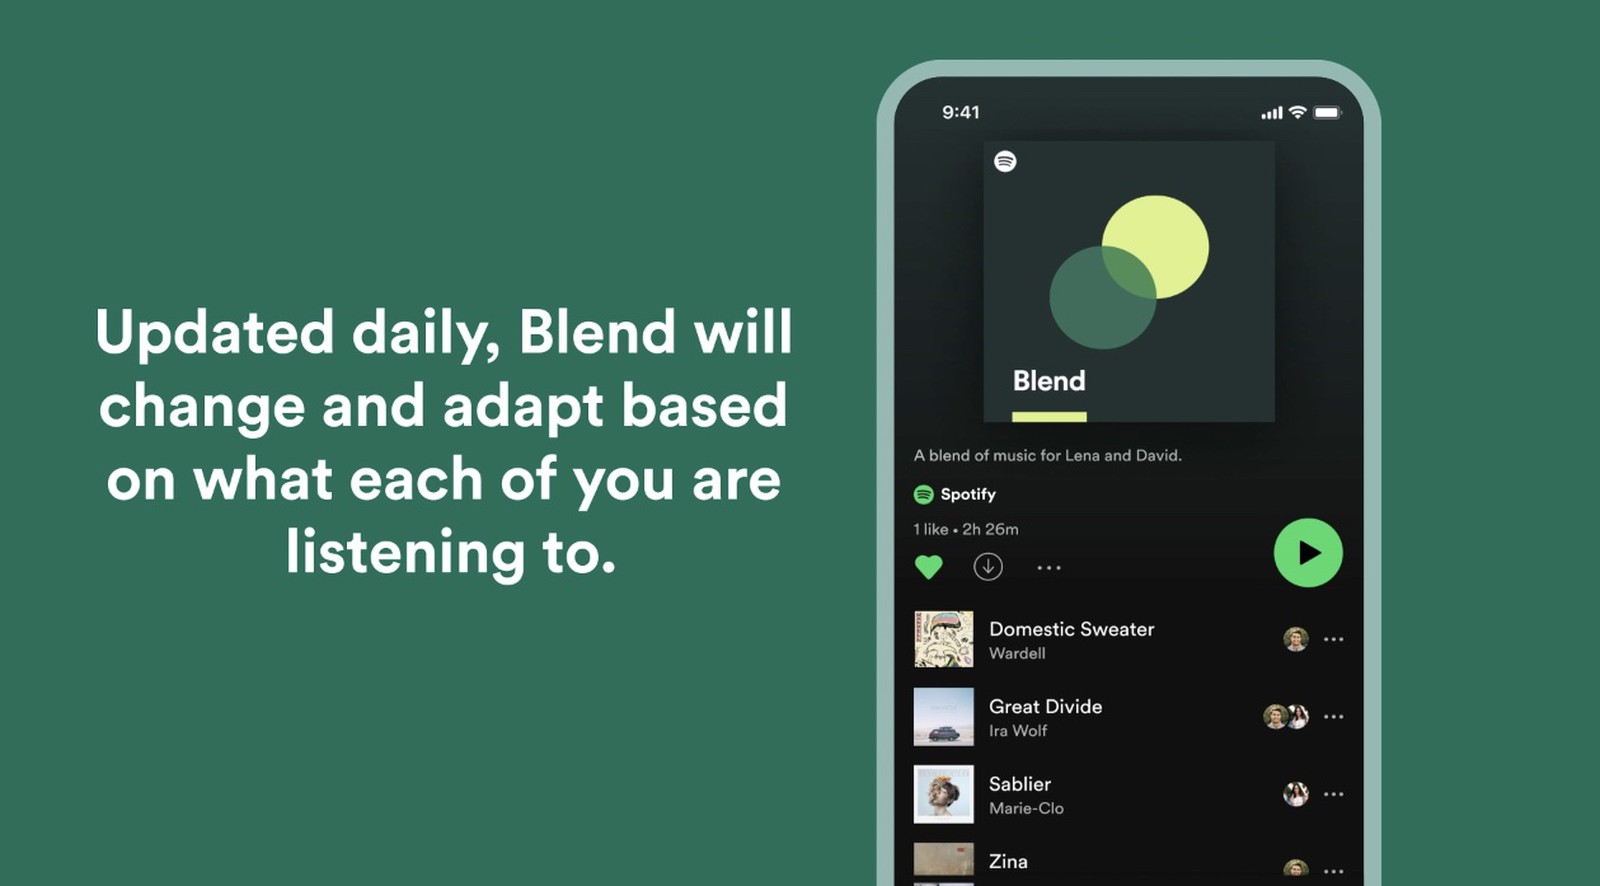 how to make spotify blend with friends